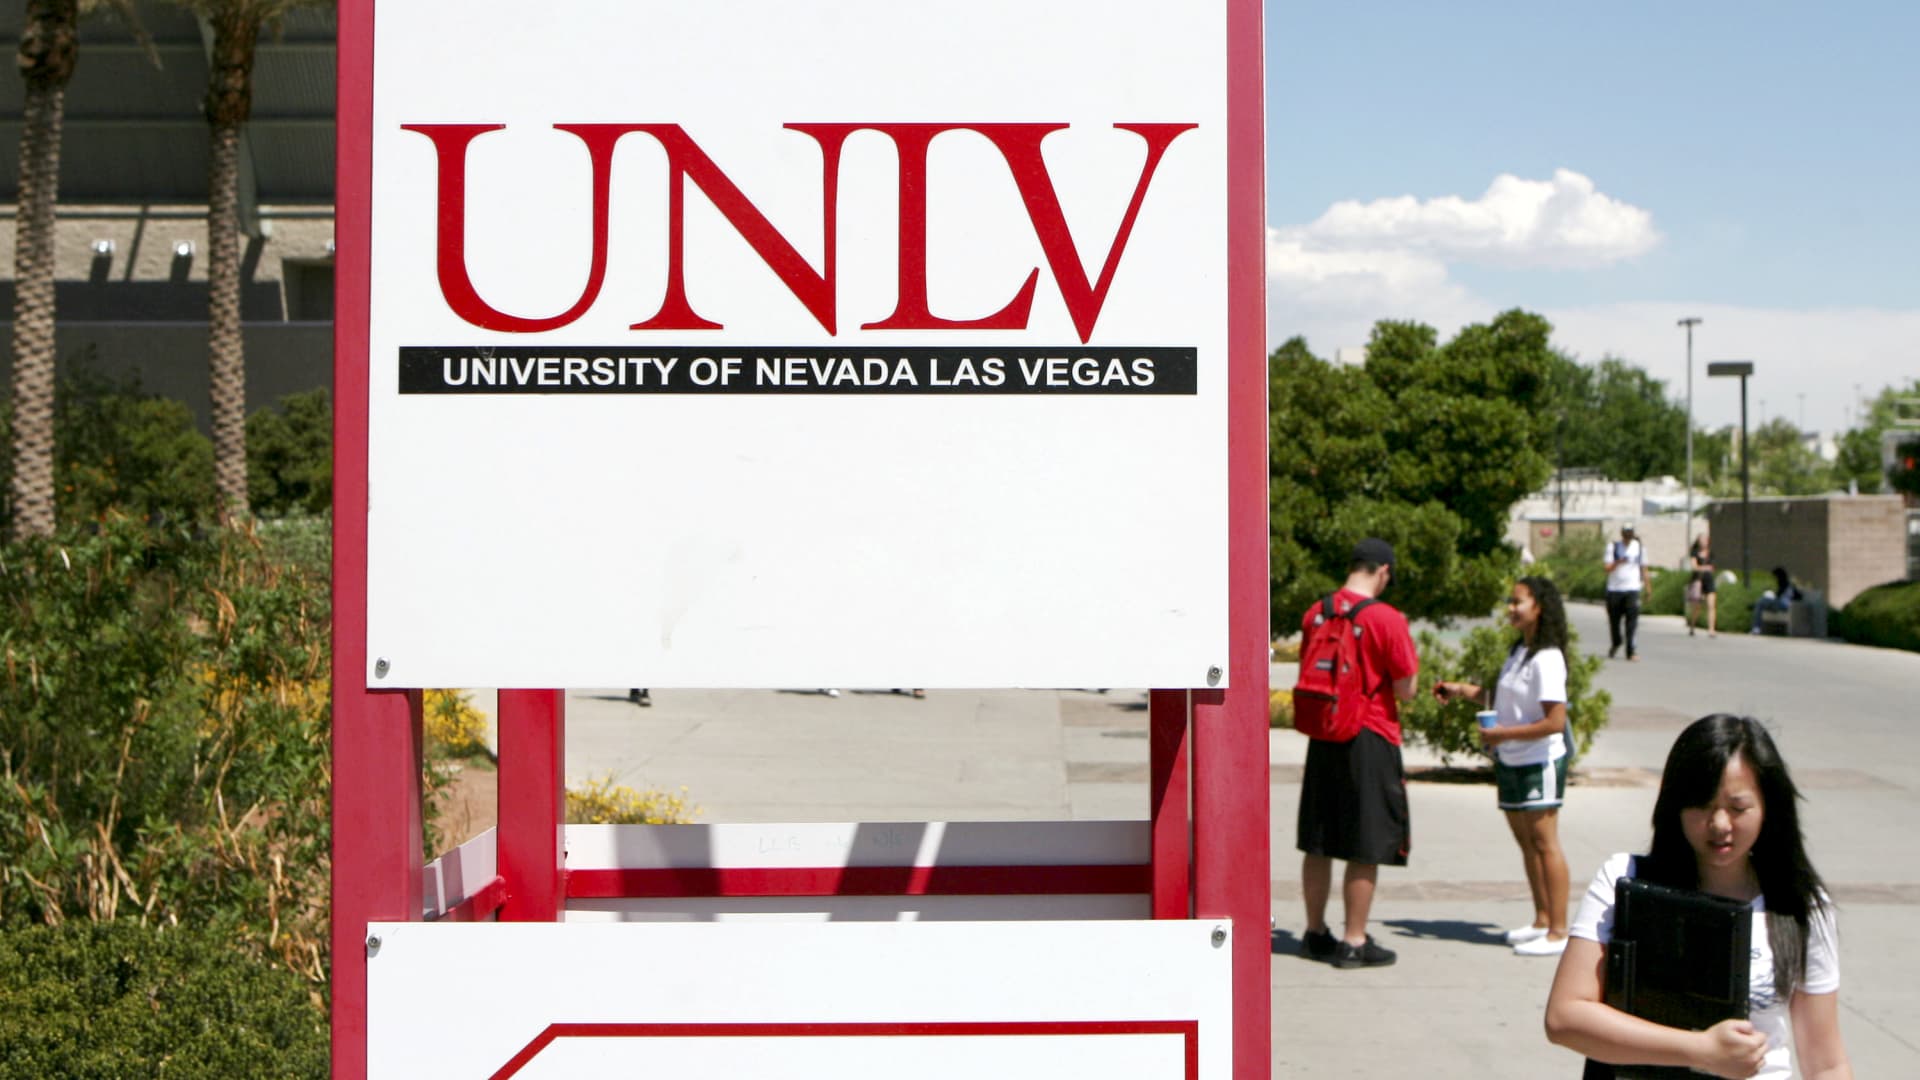 Police responding to reports of active shooter, multiple victims at University of Nevada, Las Vegas